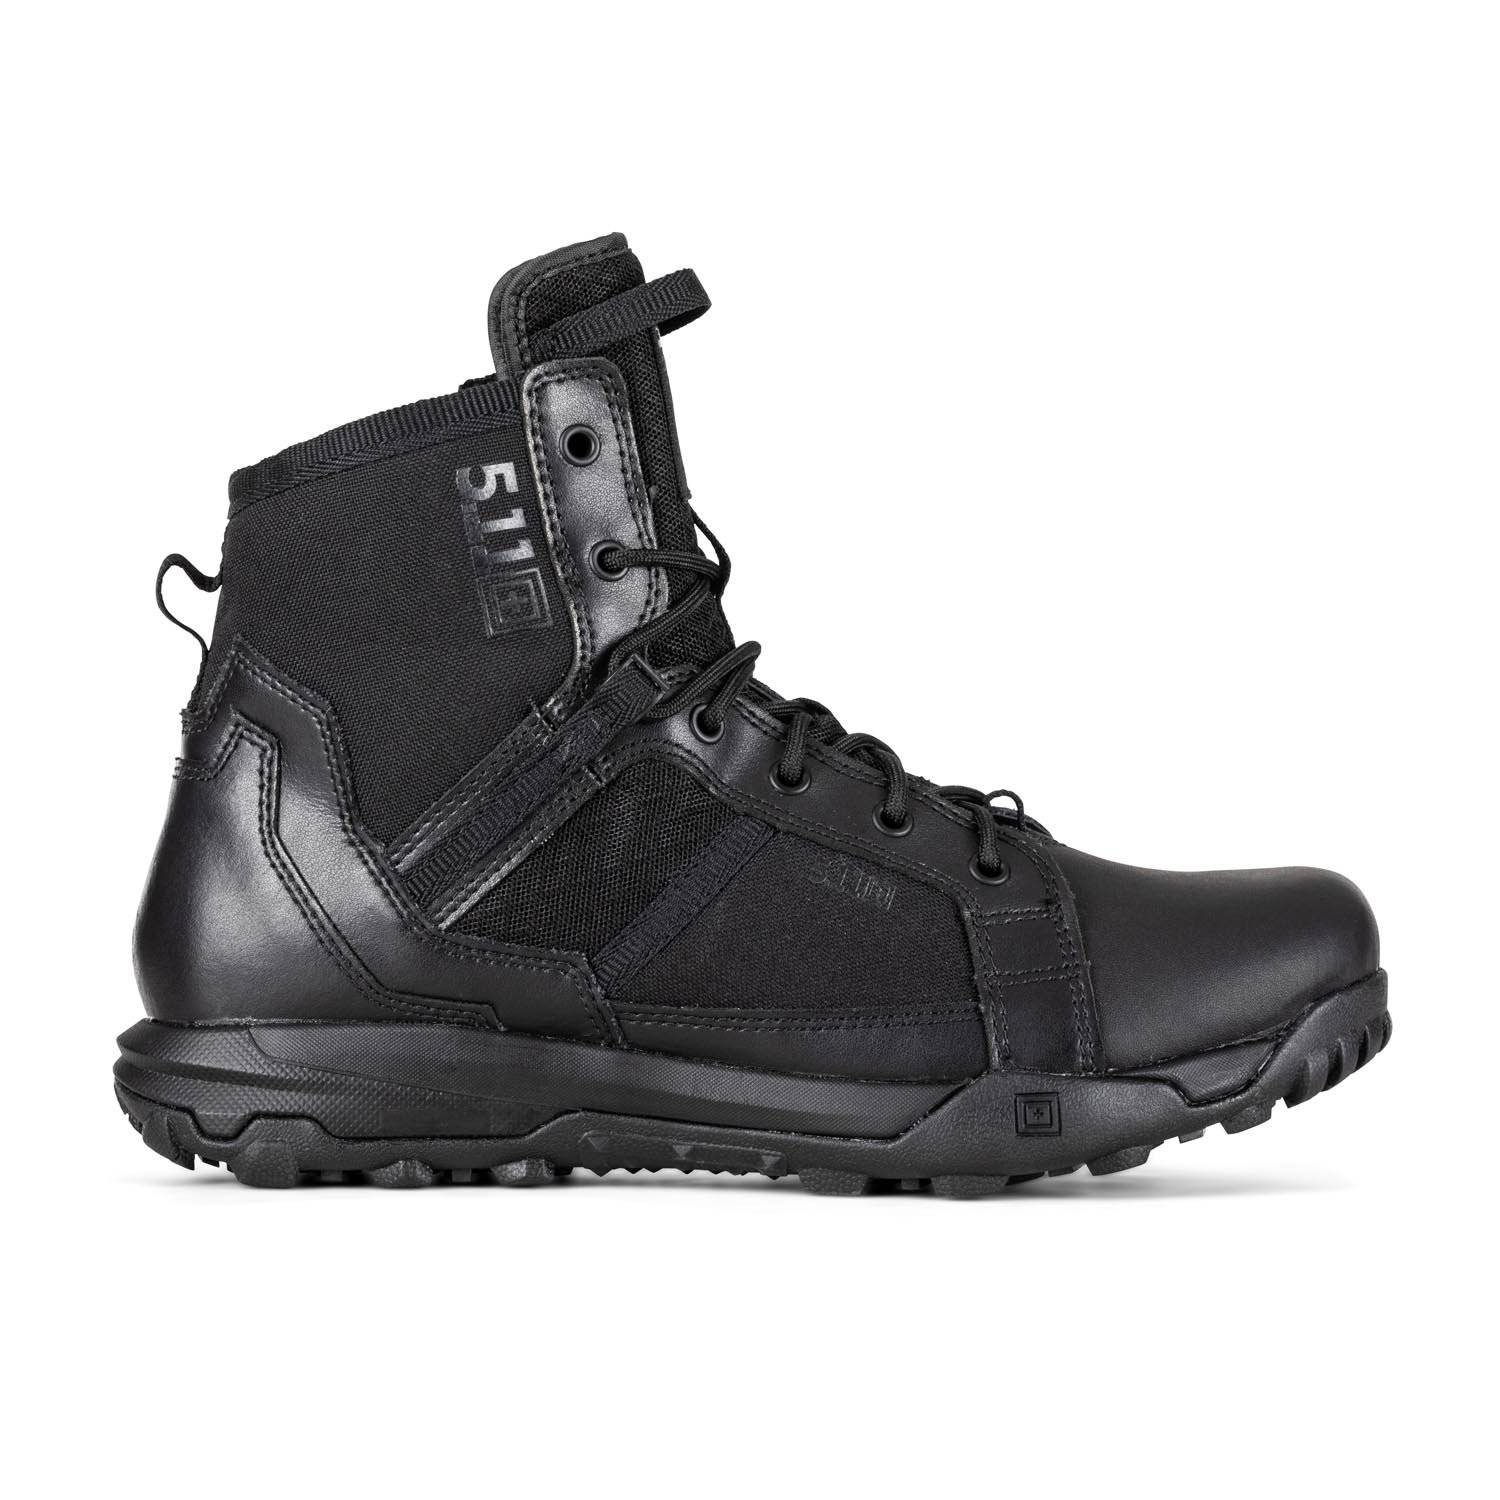 5.11 Tactical A/T 6 Side Zip Boots